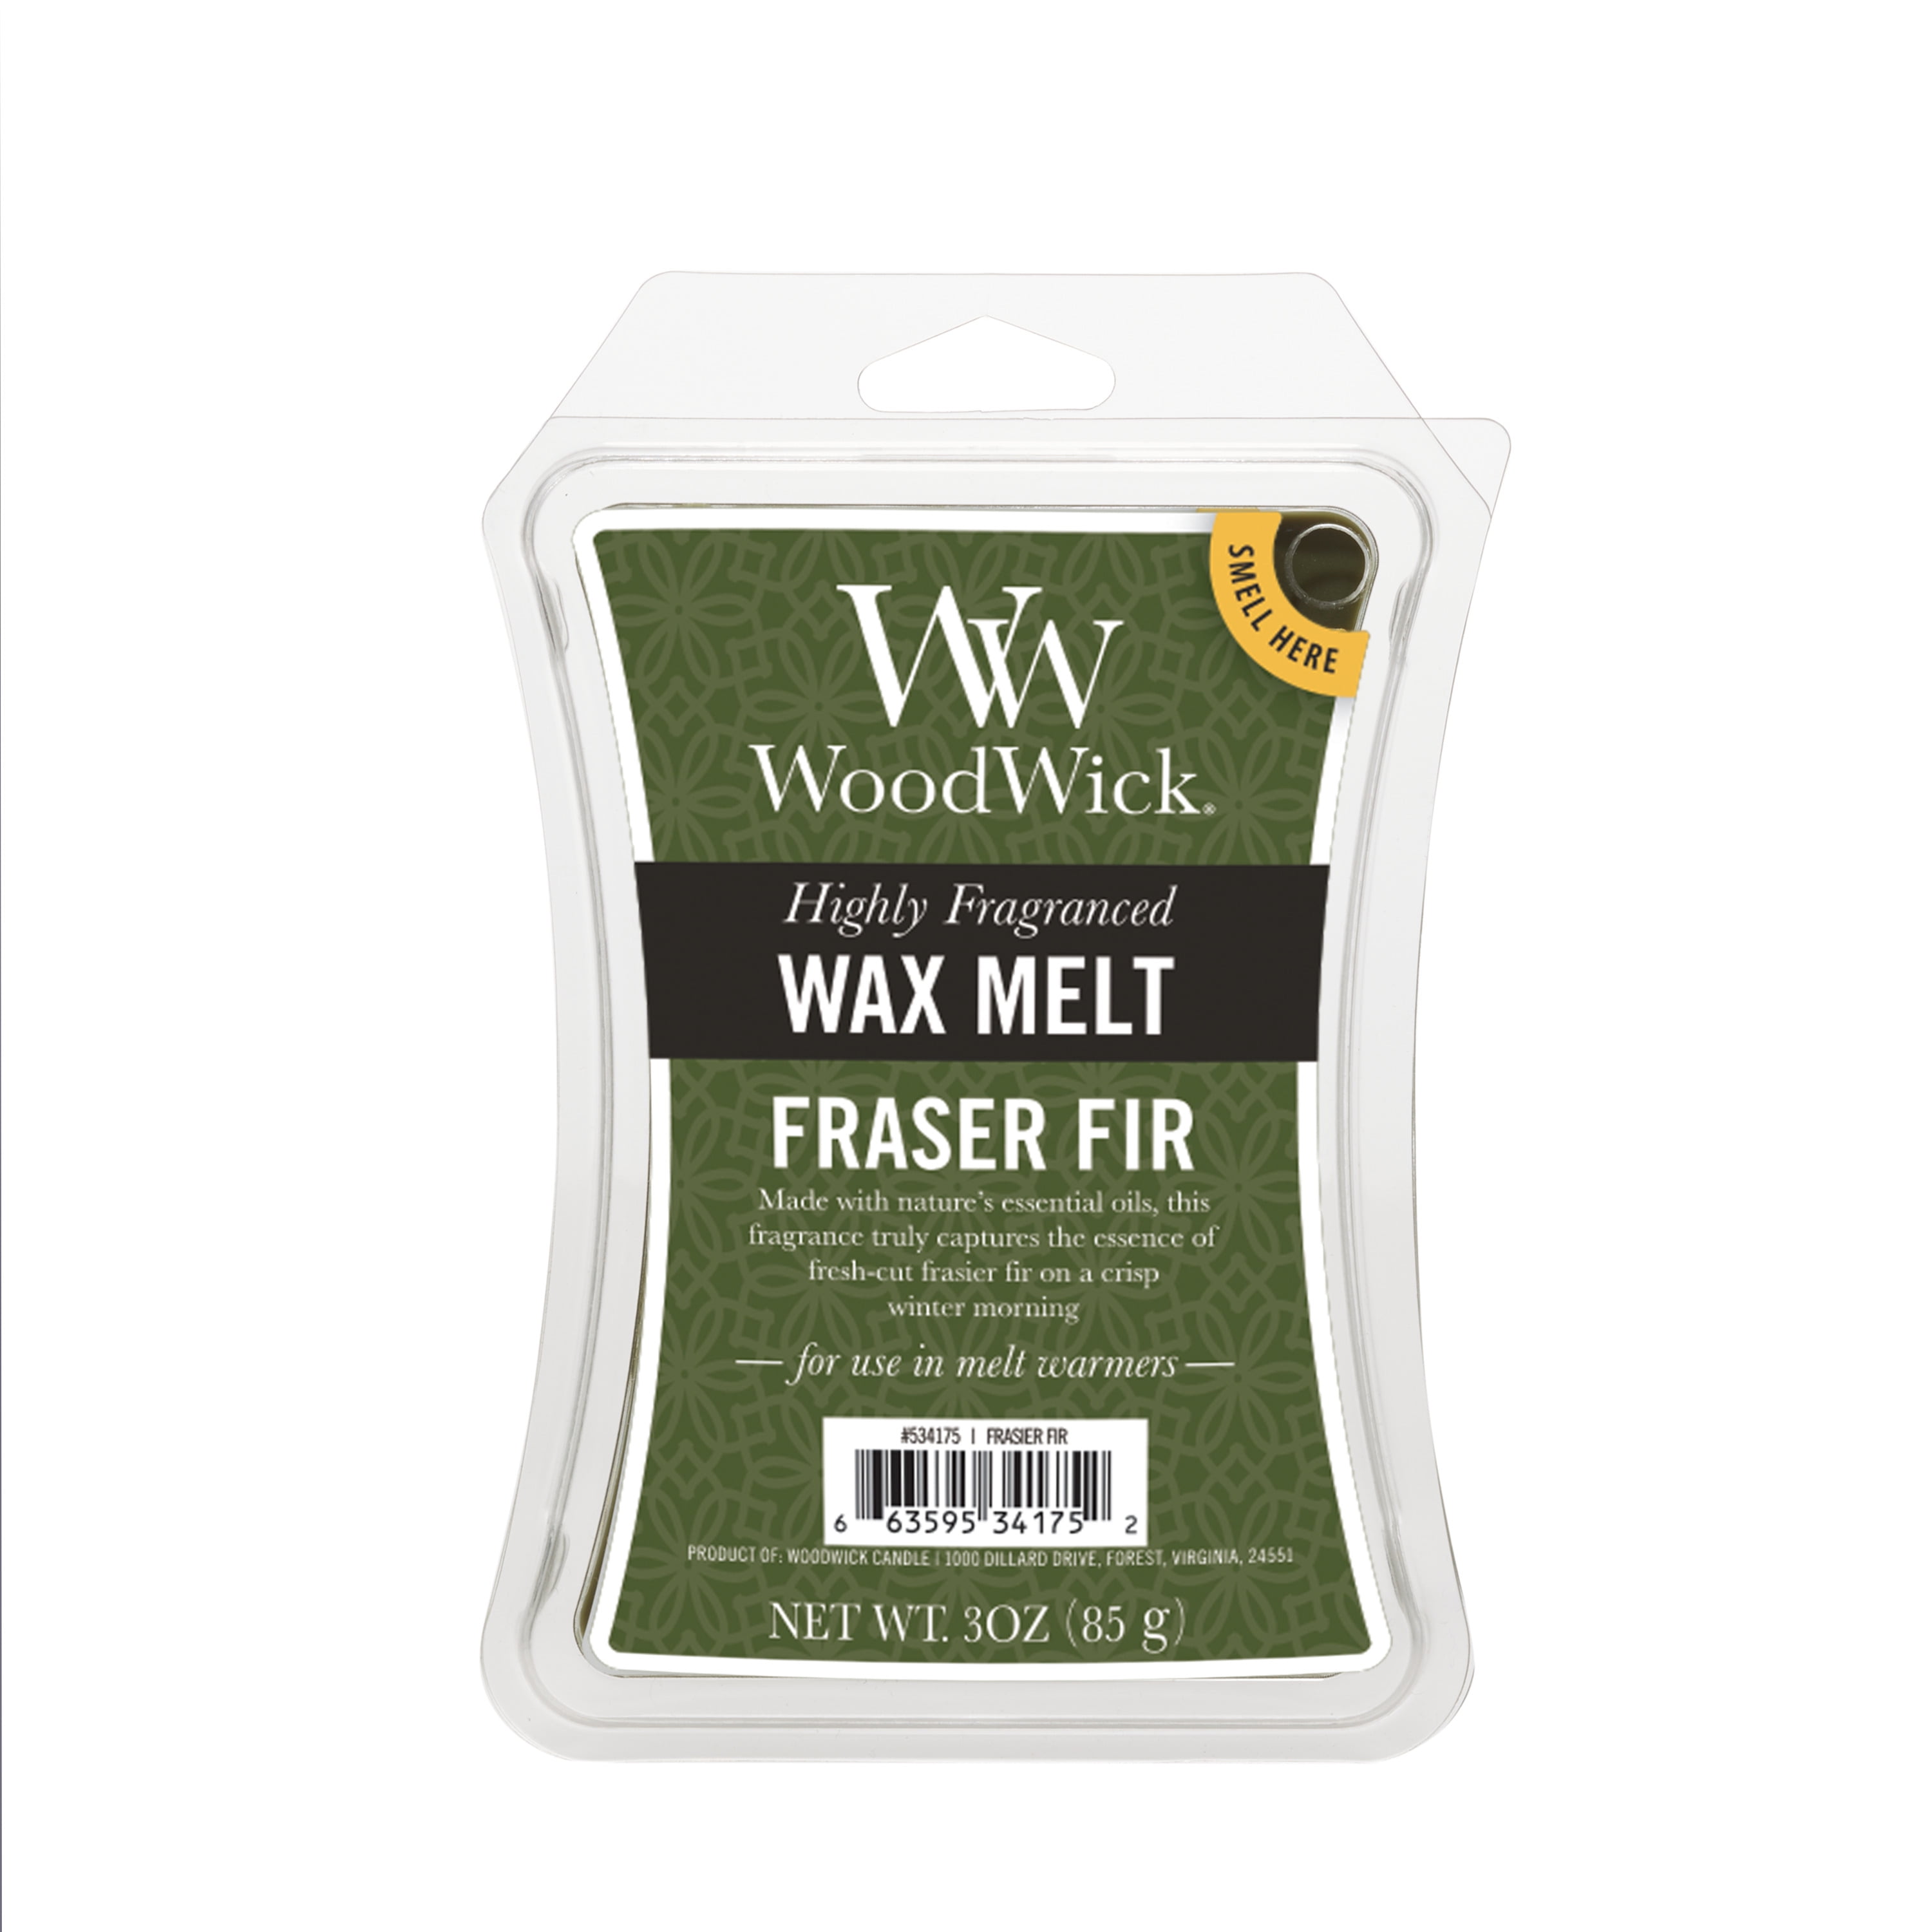 WoodWick Wax Melts Tarts 6 pack or Single Pack - BUY ANY 3+ GET